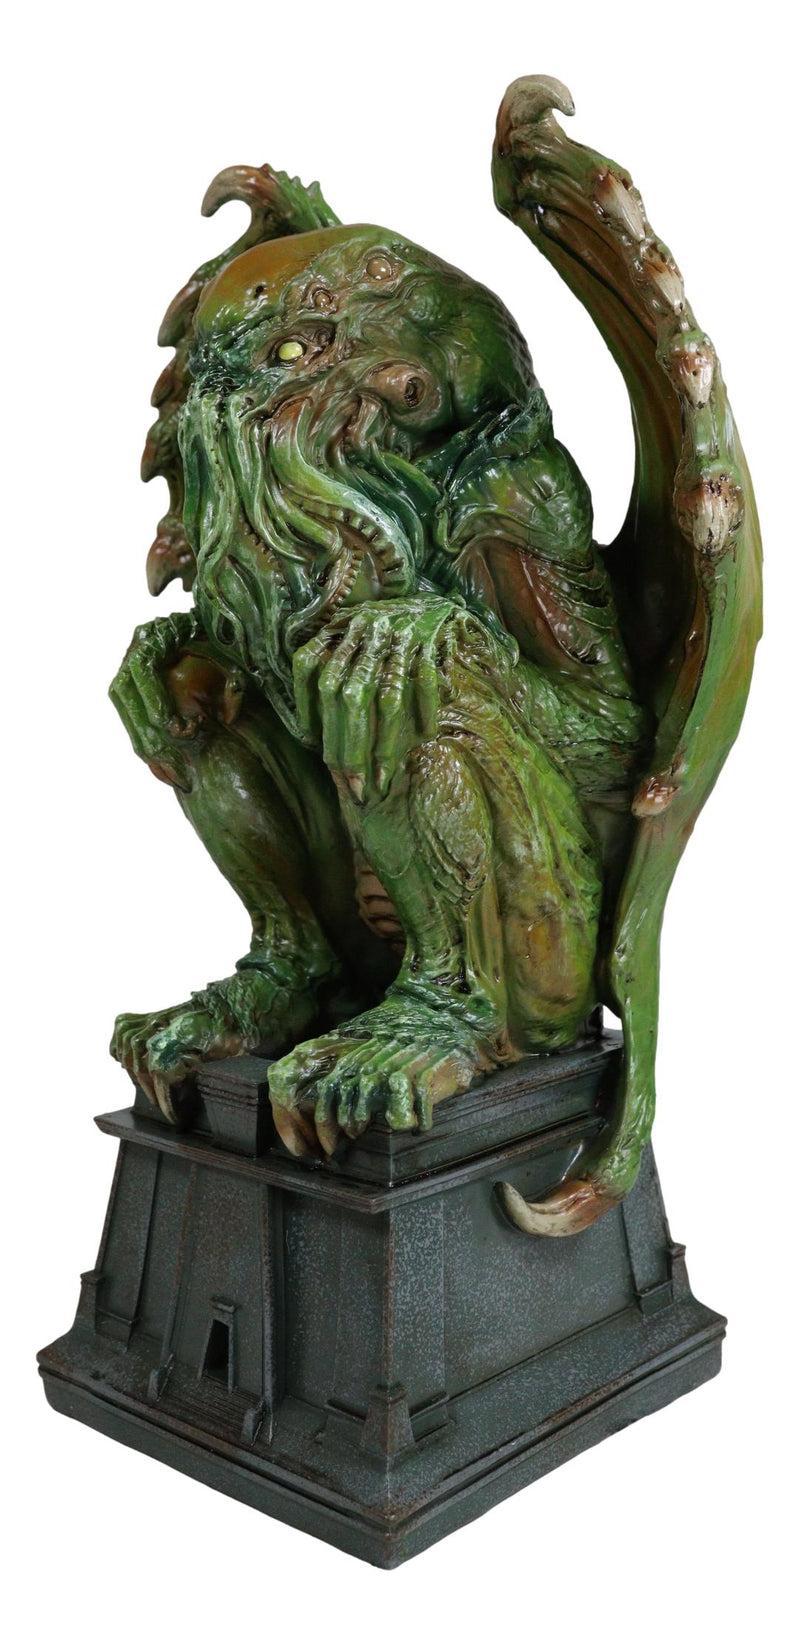 The Call of Cthulhu Alien Creature Seated On Pedestal Throne Desktop Figurine